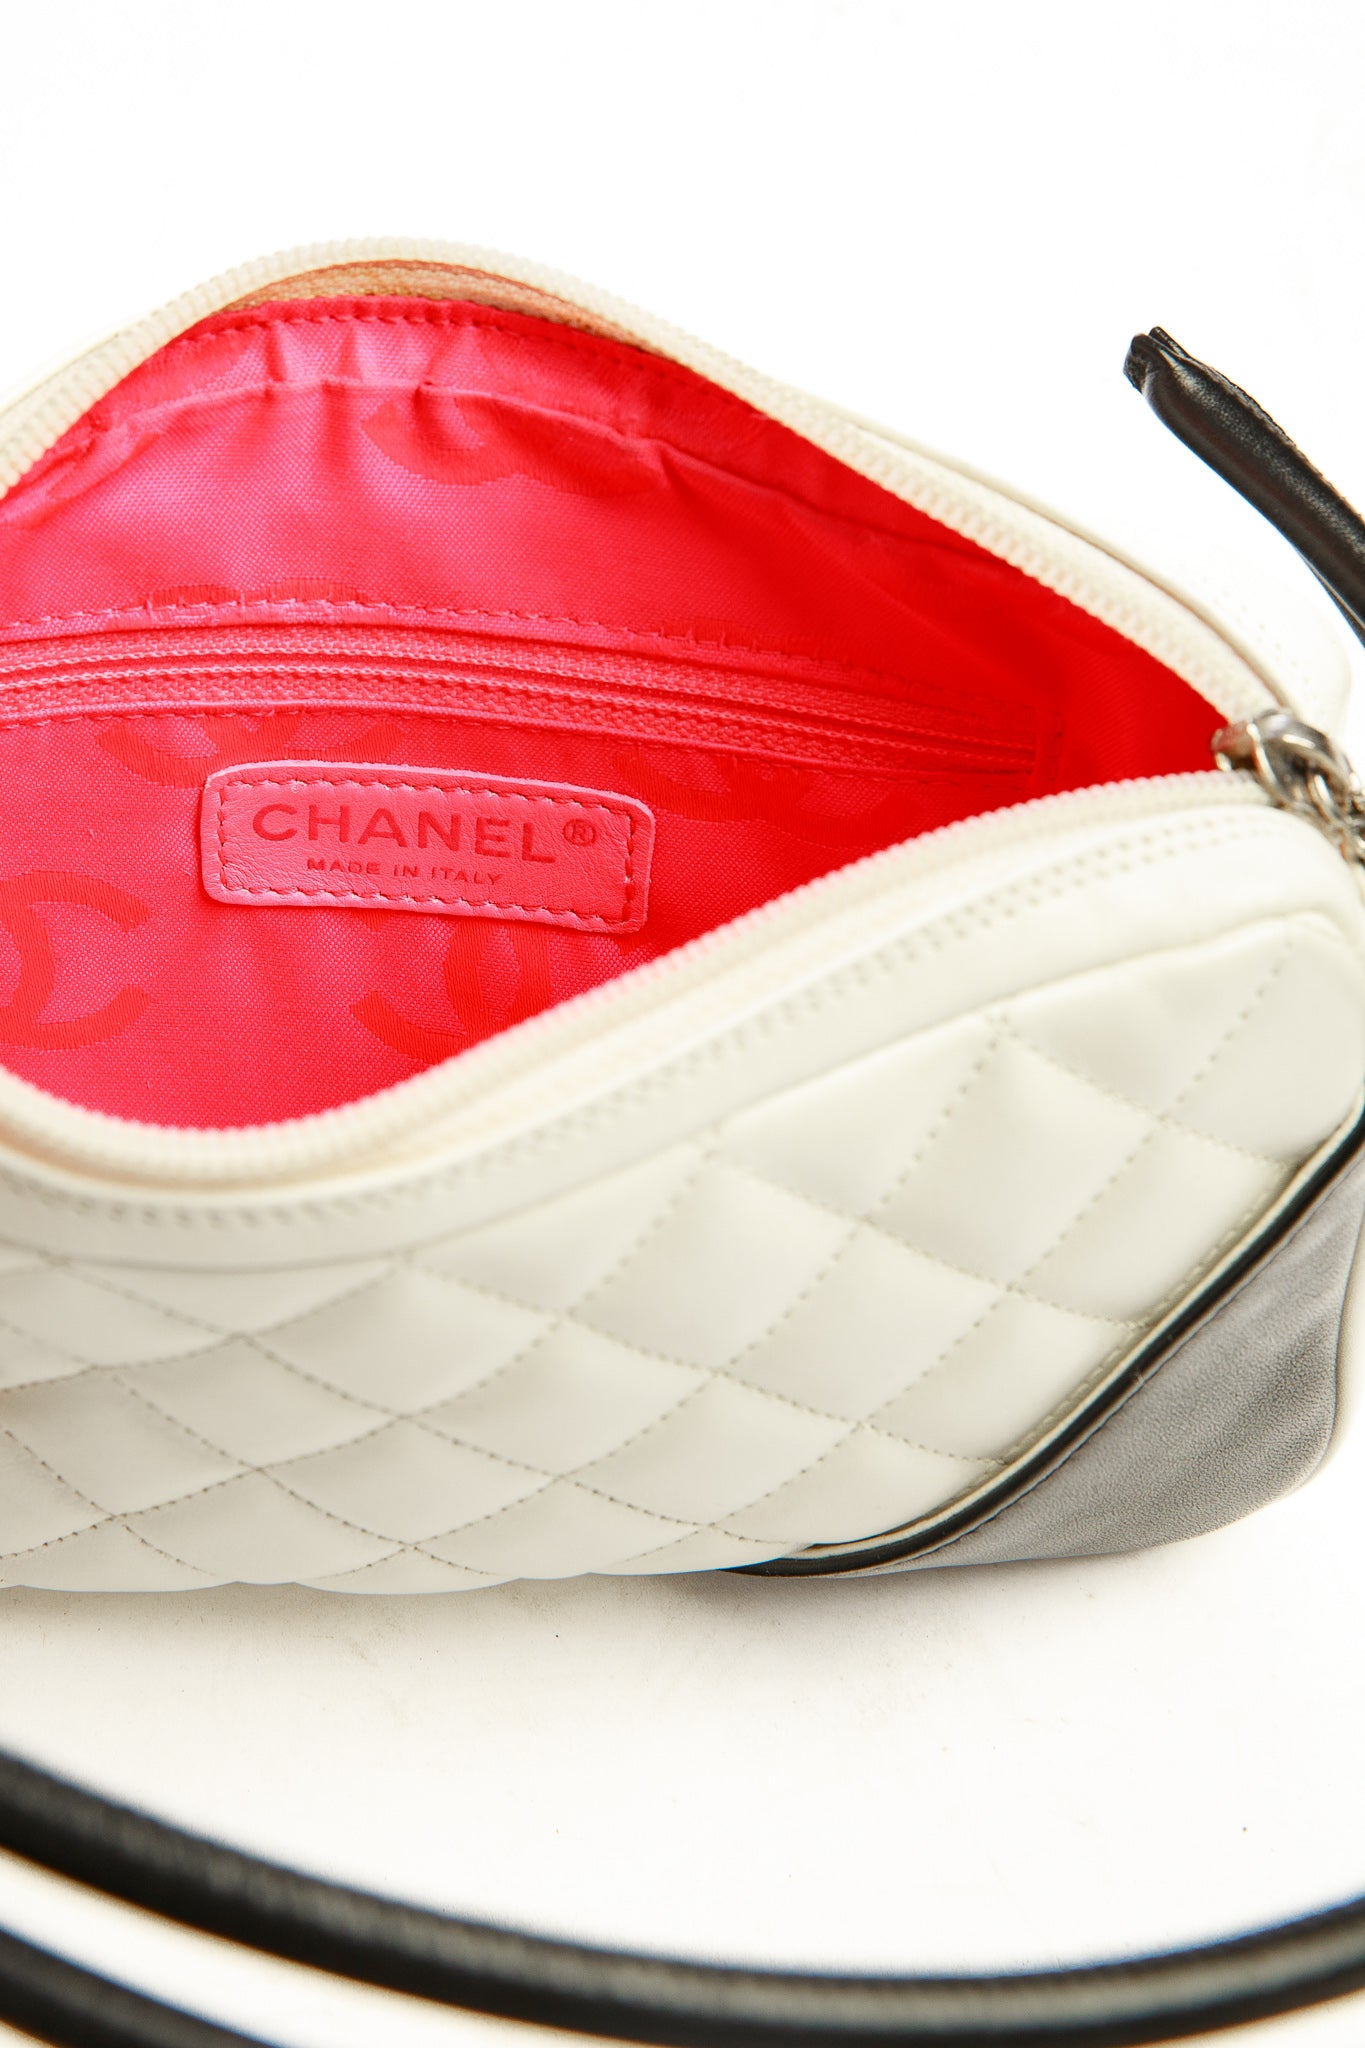 Chanel Black and White Cambon Rectangular Quilted Mini